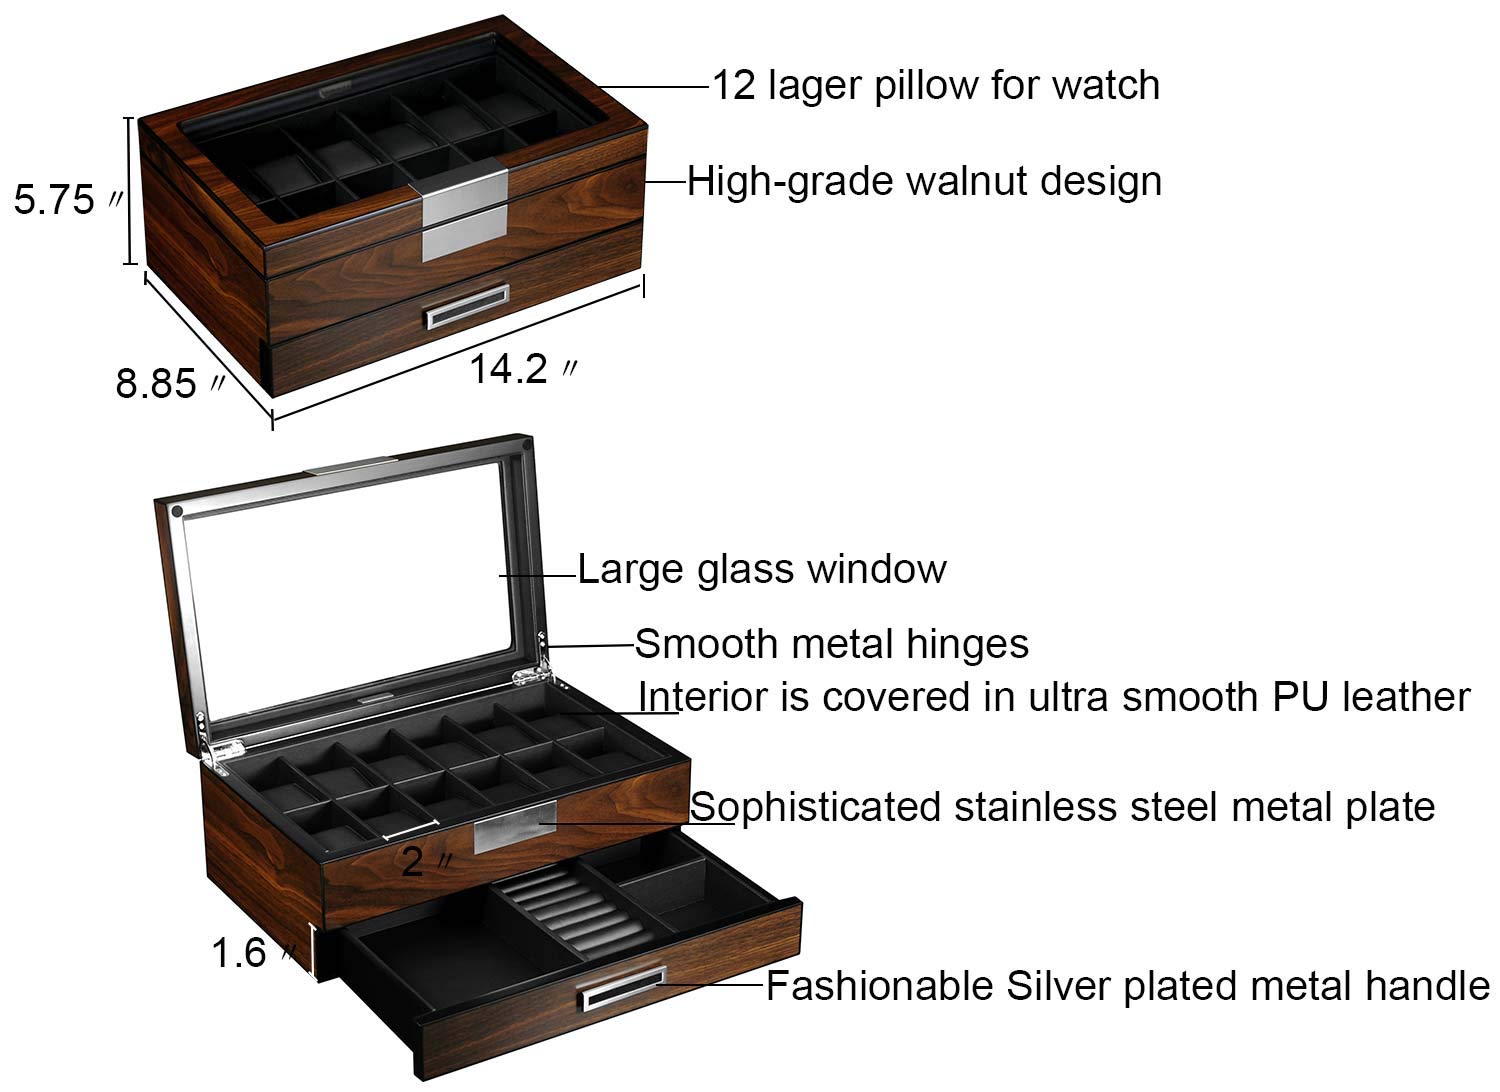 Lifomenz Co Wooden Watch Box for Men Watch Jewelry Box organizer with Valet Drawer,12 Slot Watch Display Case Holder Large Watch,Men Accessories Organizer with Real Glass Window Top